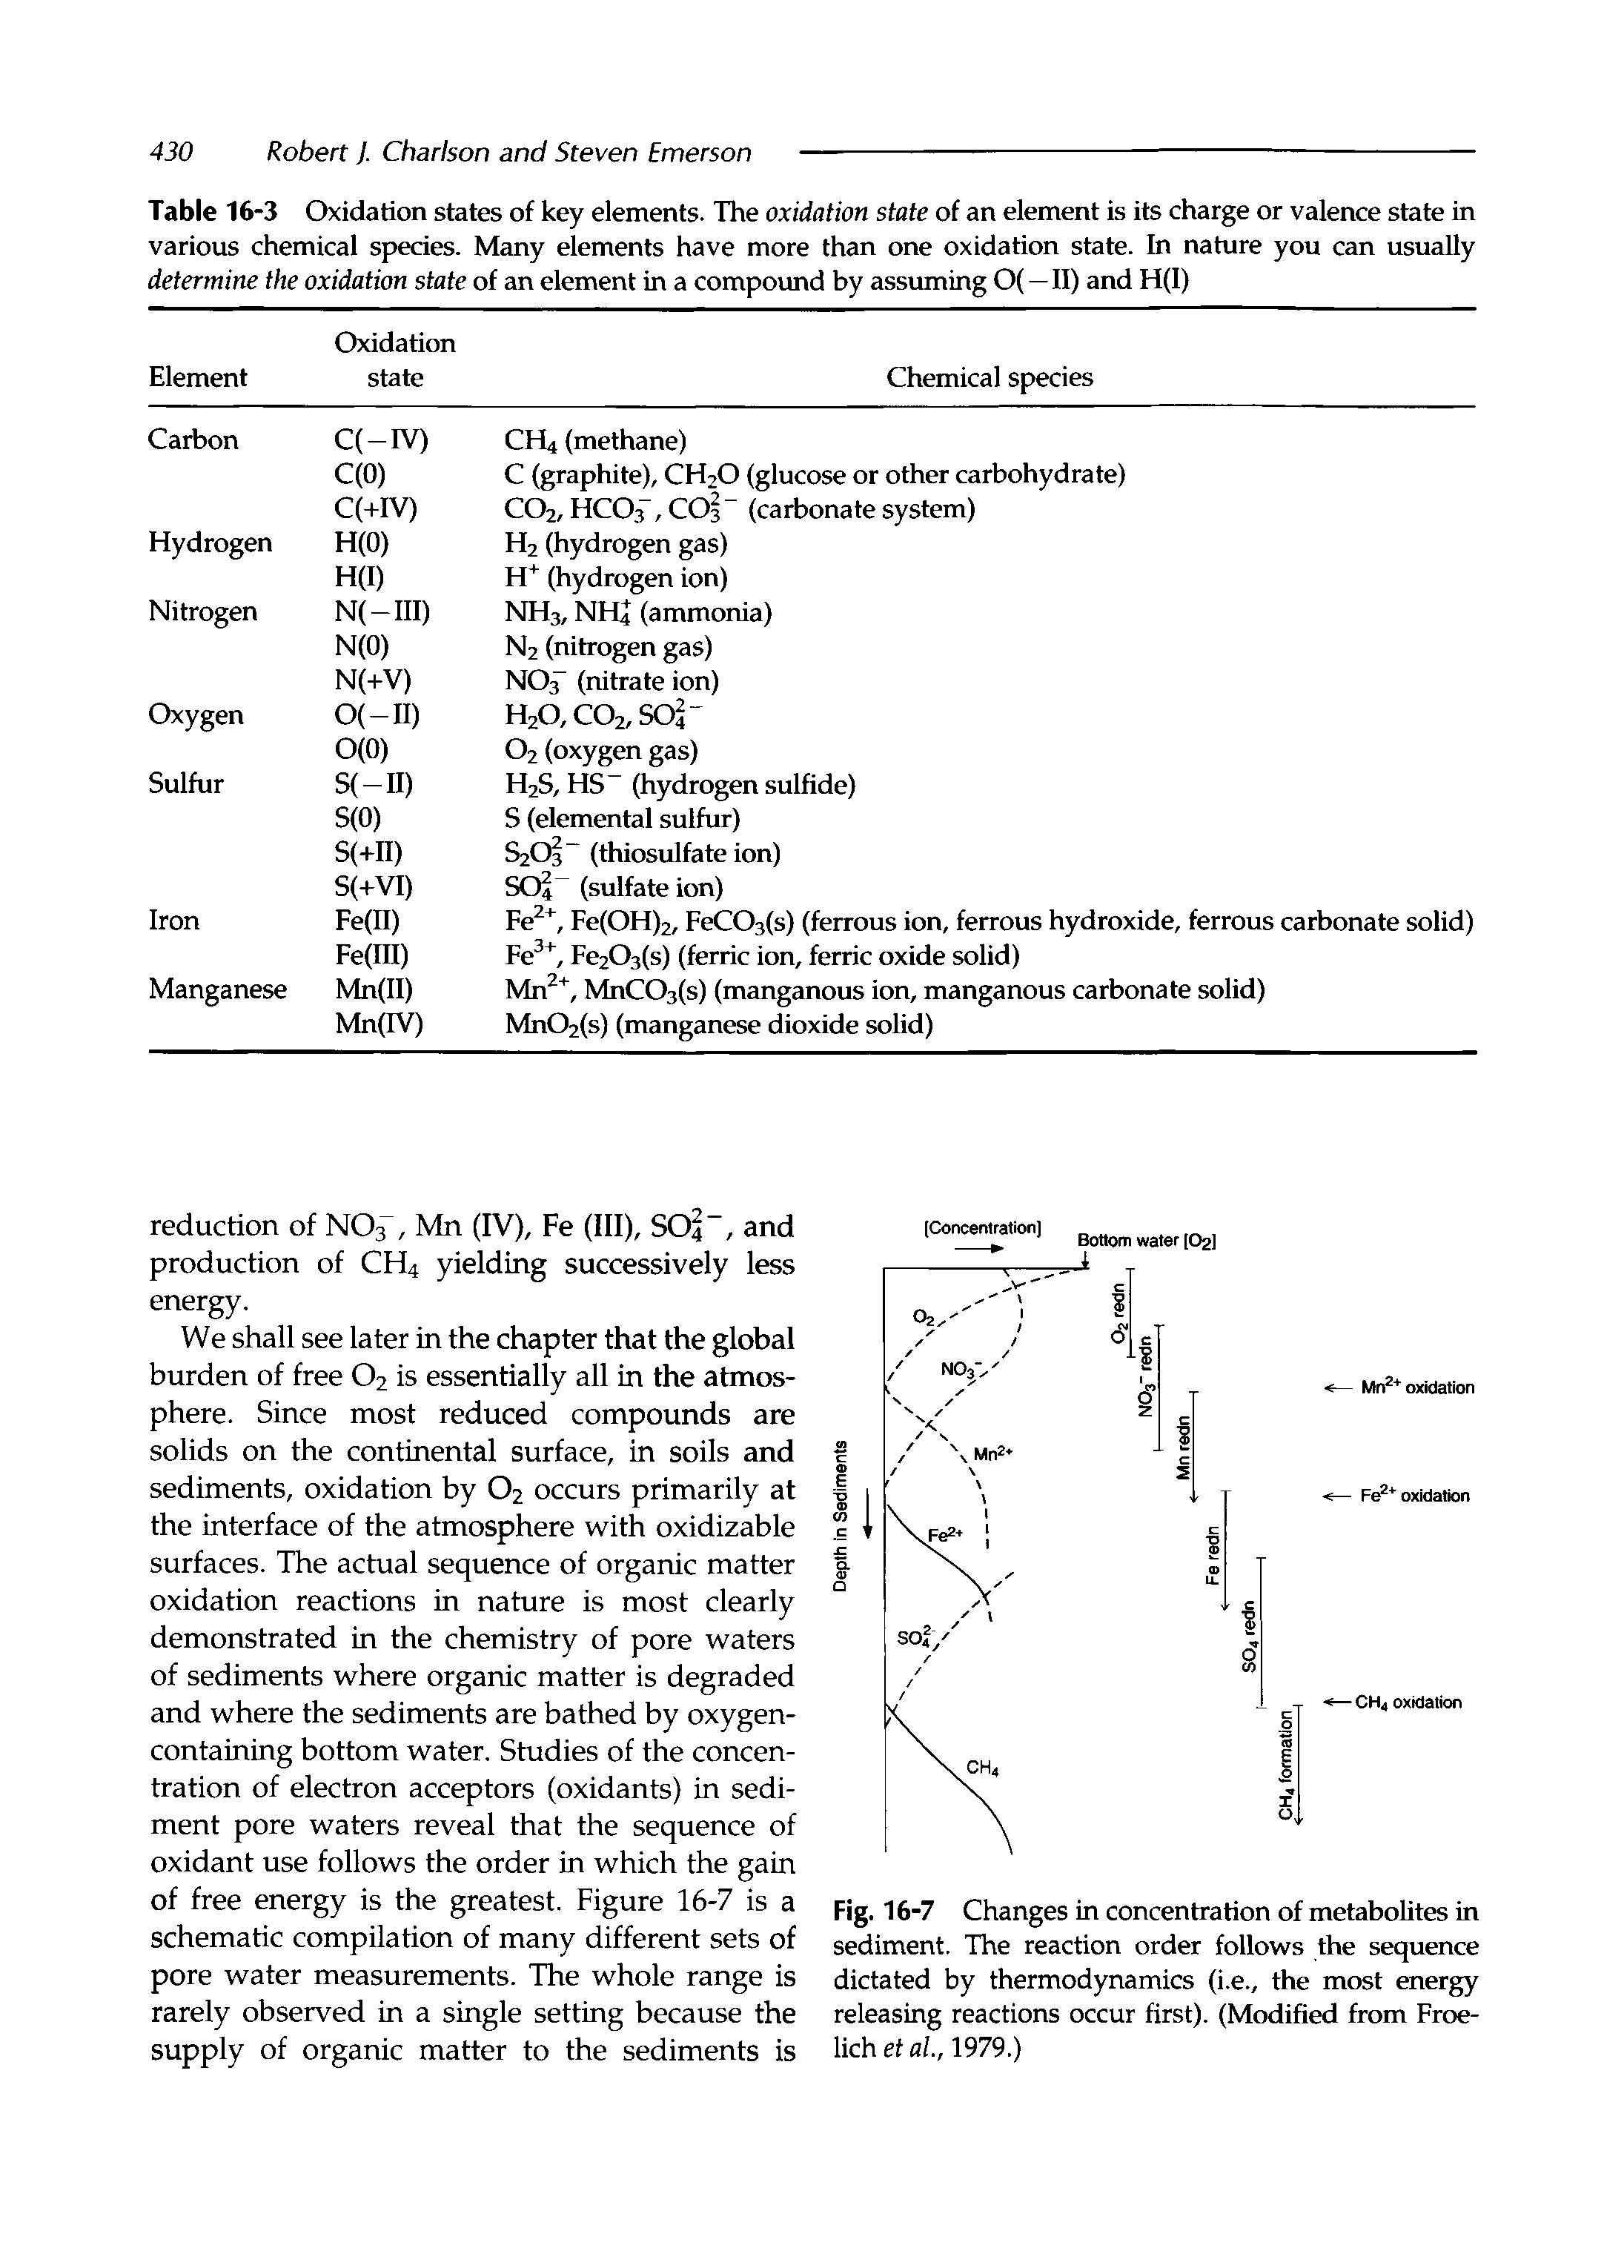 Fig. 16-7 Changes in concentration of metabolites in sediment. The reaction order follows the sequence dictated by thermodynamics (i.e., the most energy releasing reactions occur first). (Modified from Froe-lich et al, 1979.)...